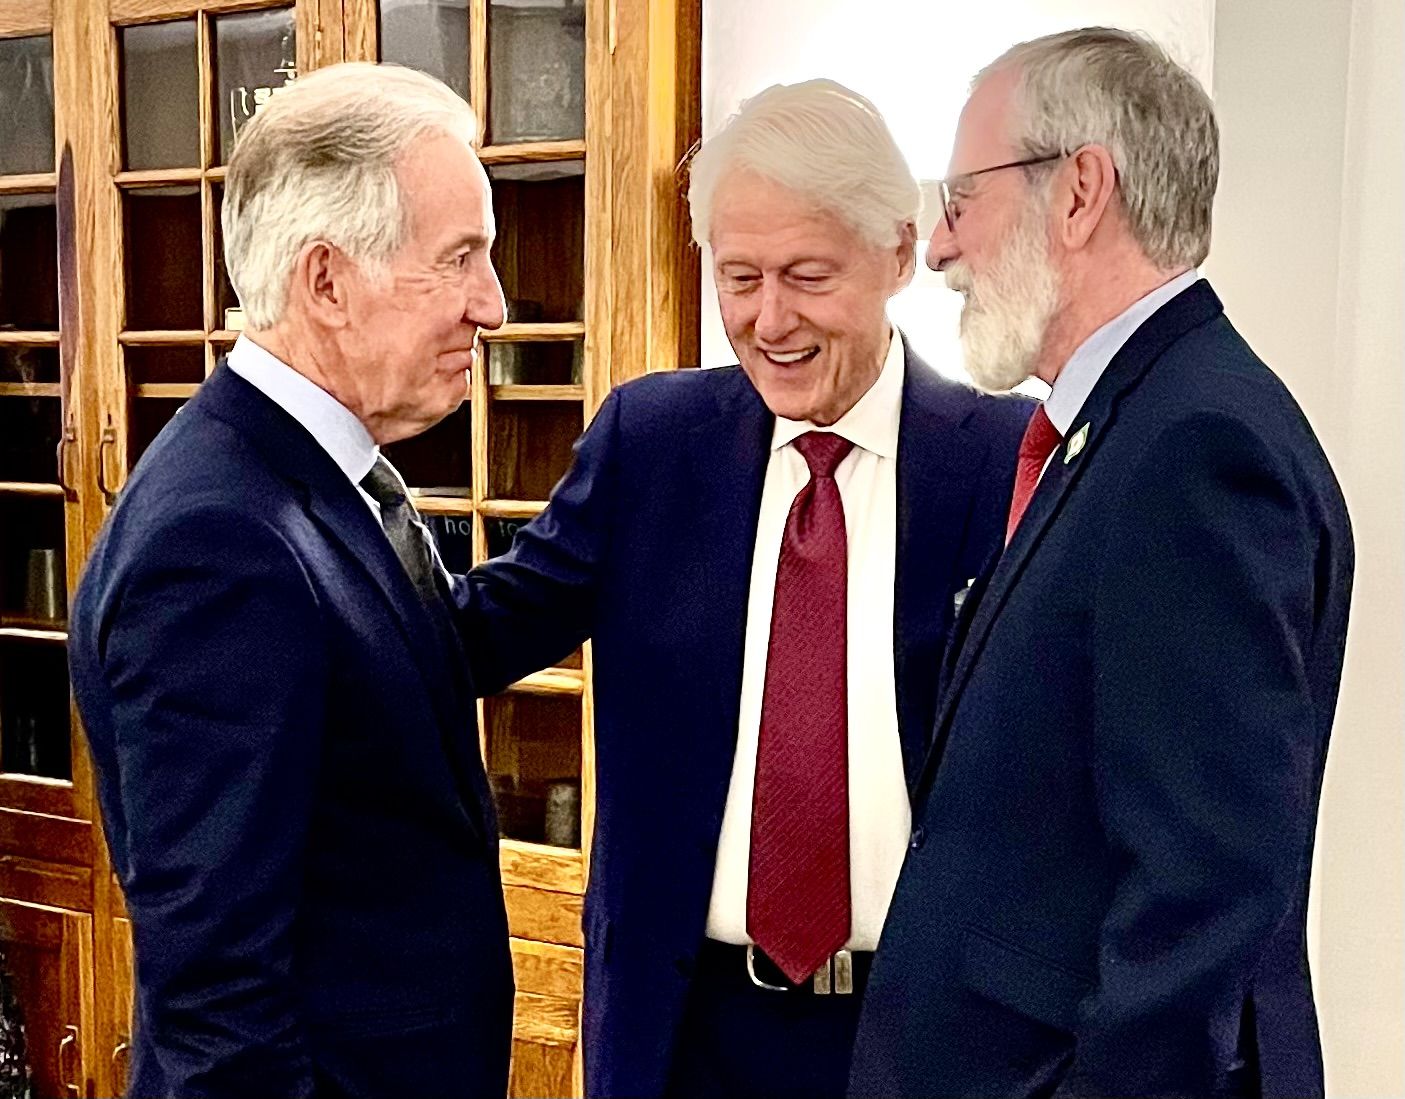 PART OF THE UNION: Richard Neal, Bill Clinton and Gerry Adams in New York